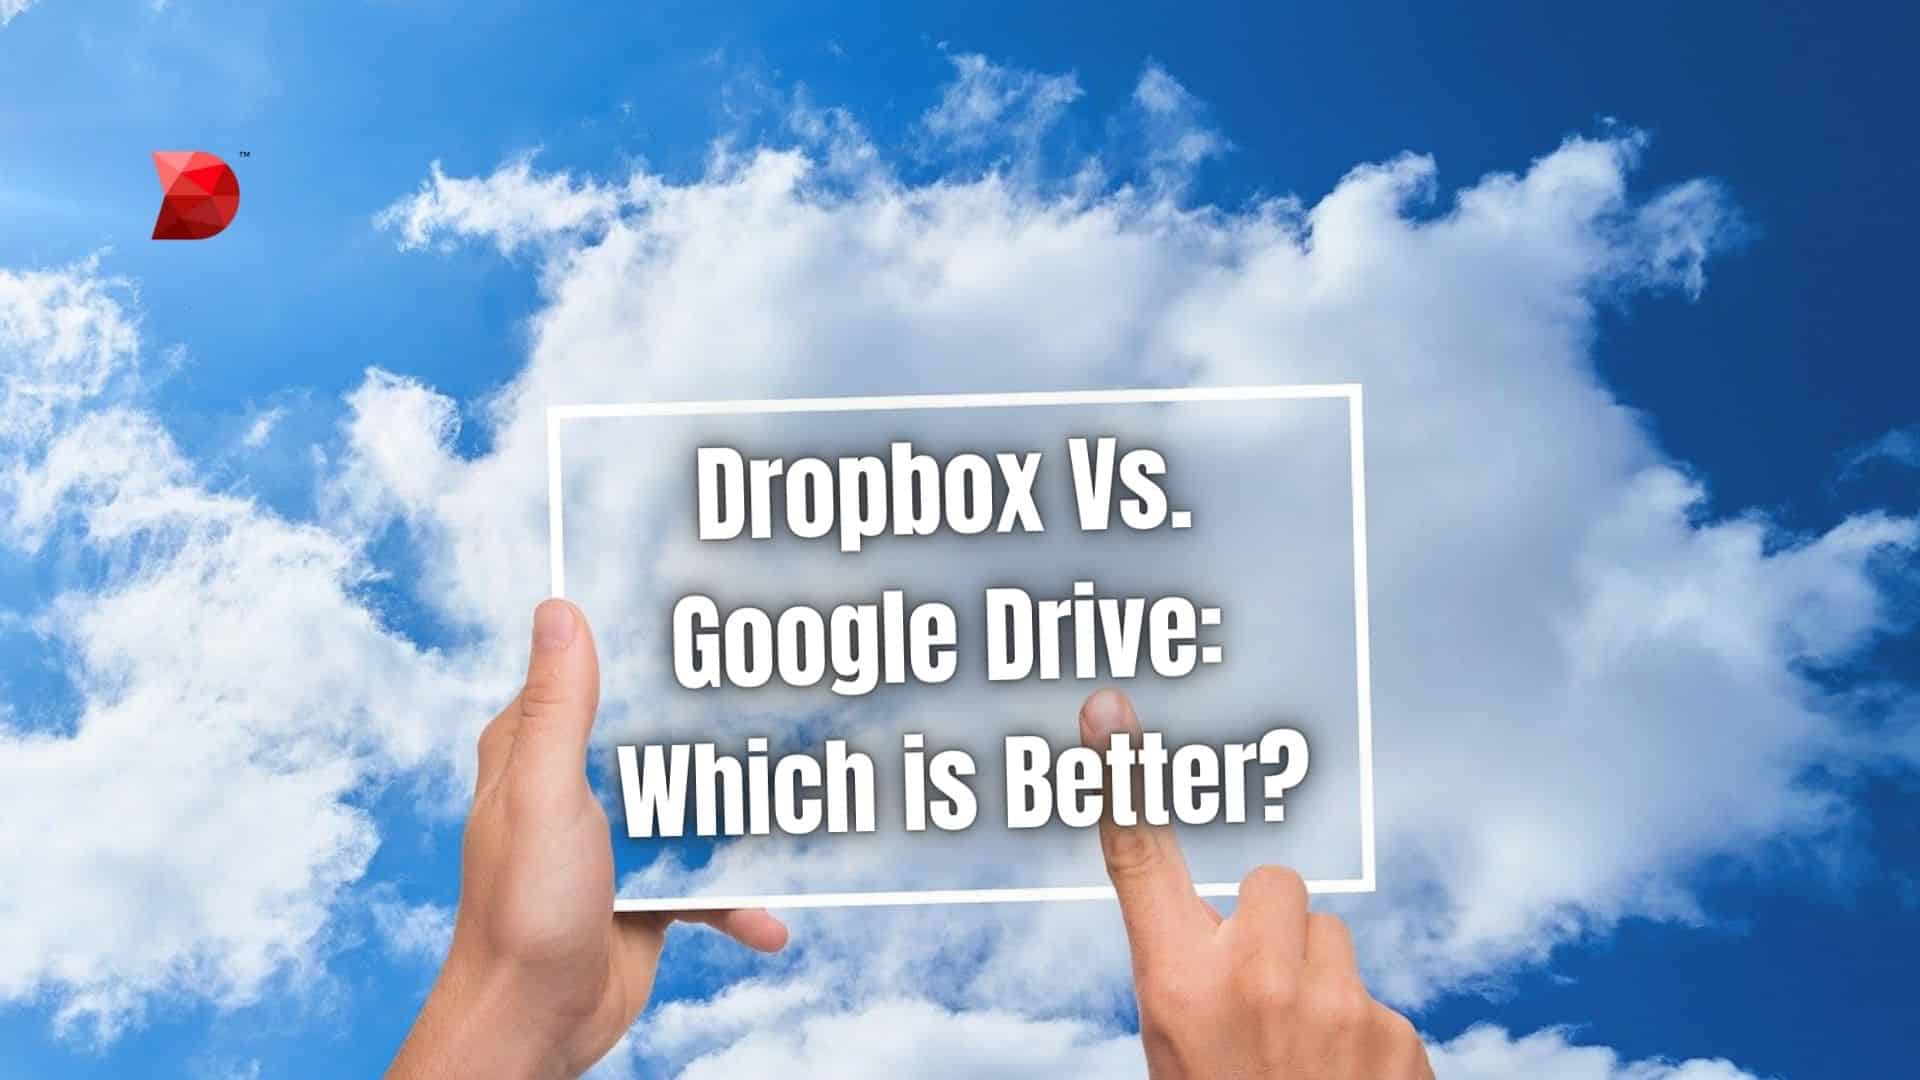 Dropbox Vs. Google Drive Which is Better